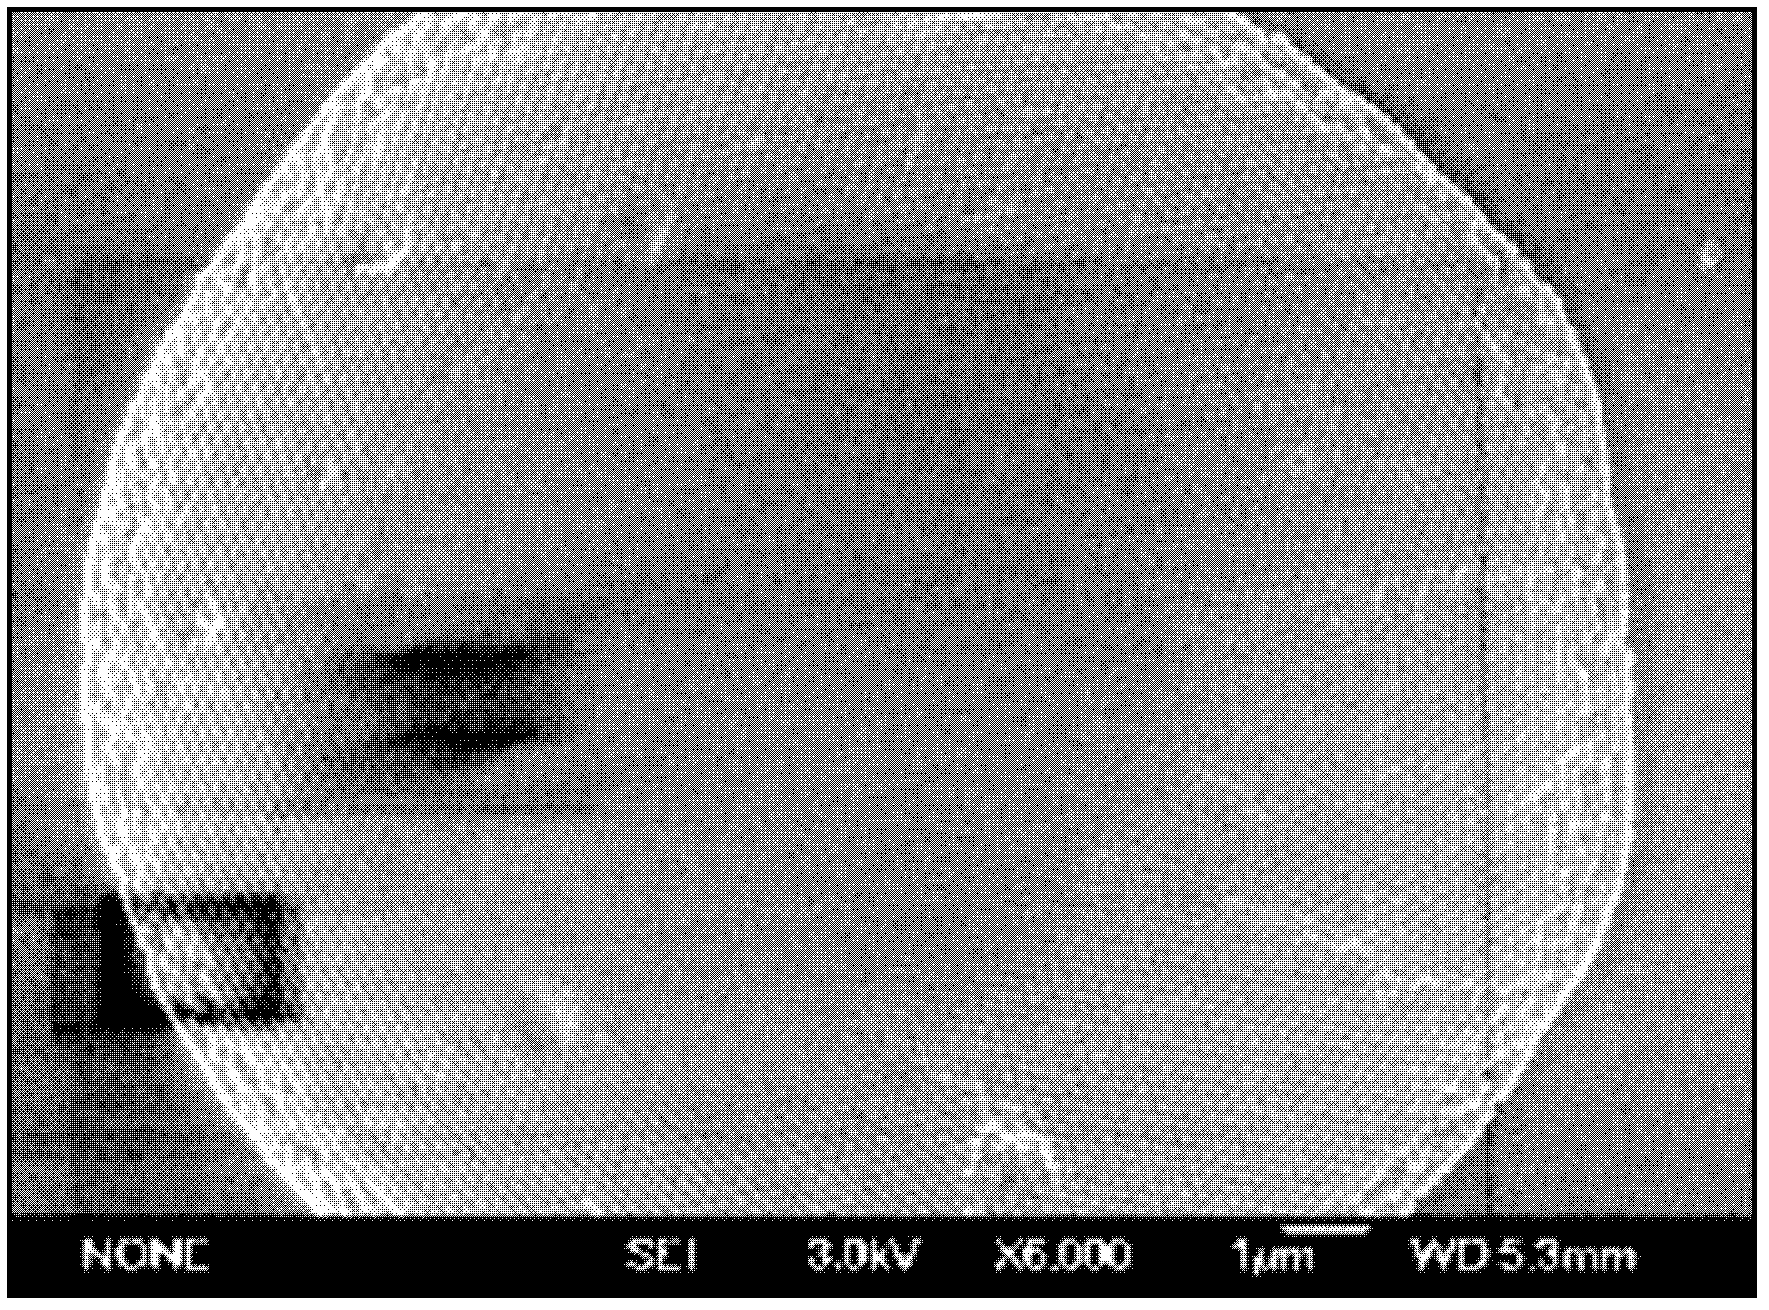 Method for utilizing ink-jet printing technology to prepare photonic crystal composite membrane with responsiveness and patterning